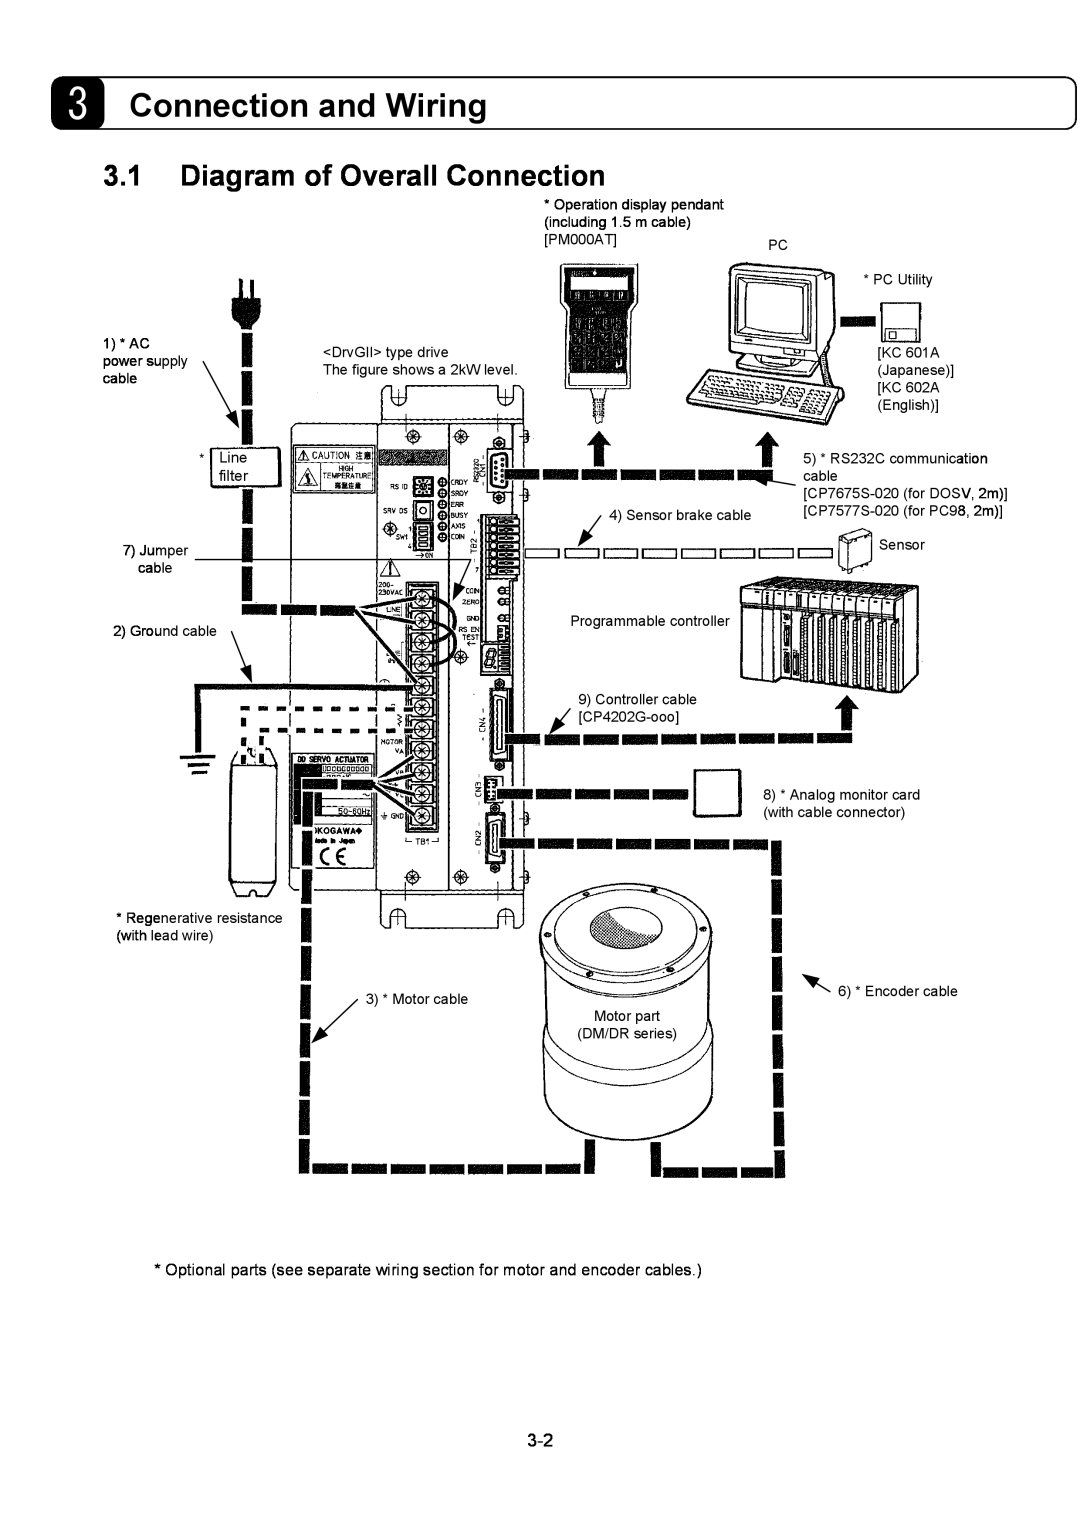 Parker Hannifin G2 manual Connection and Wiring, Diagram of Overall Connection 